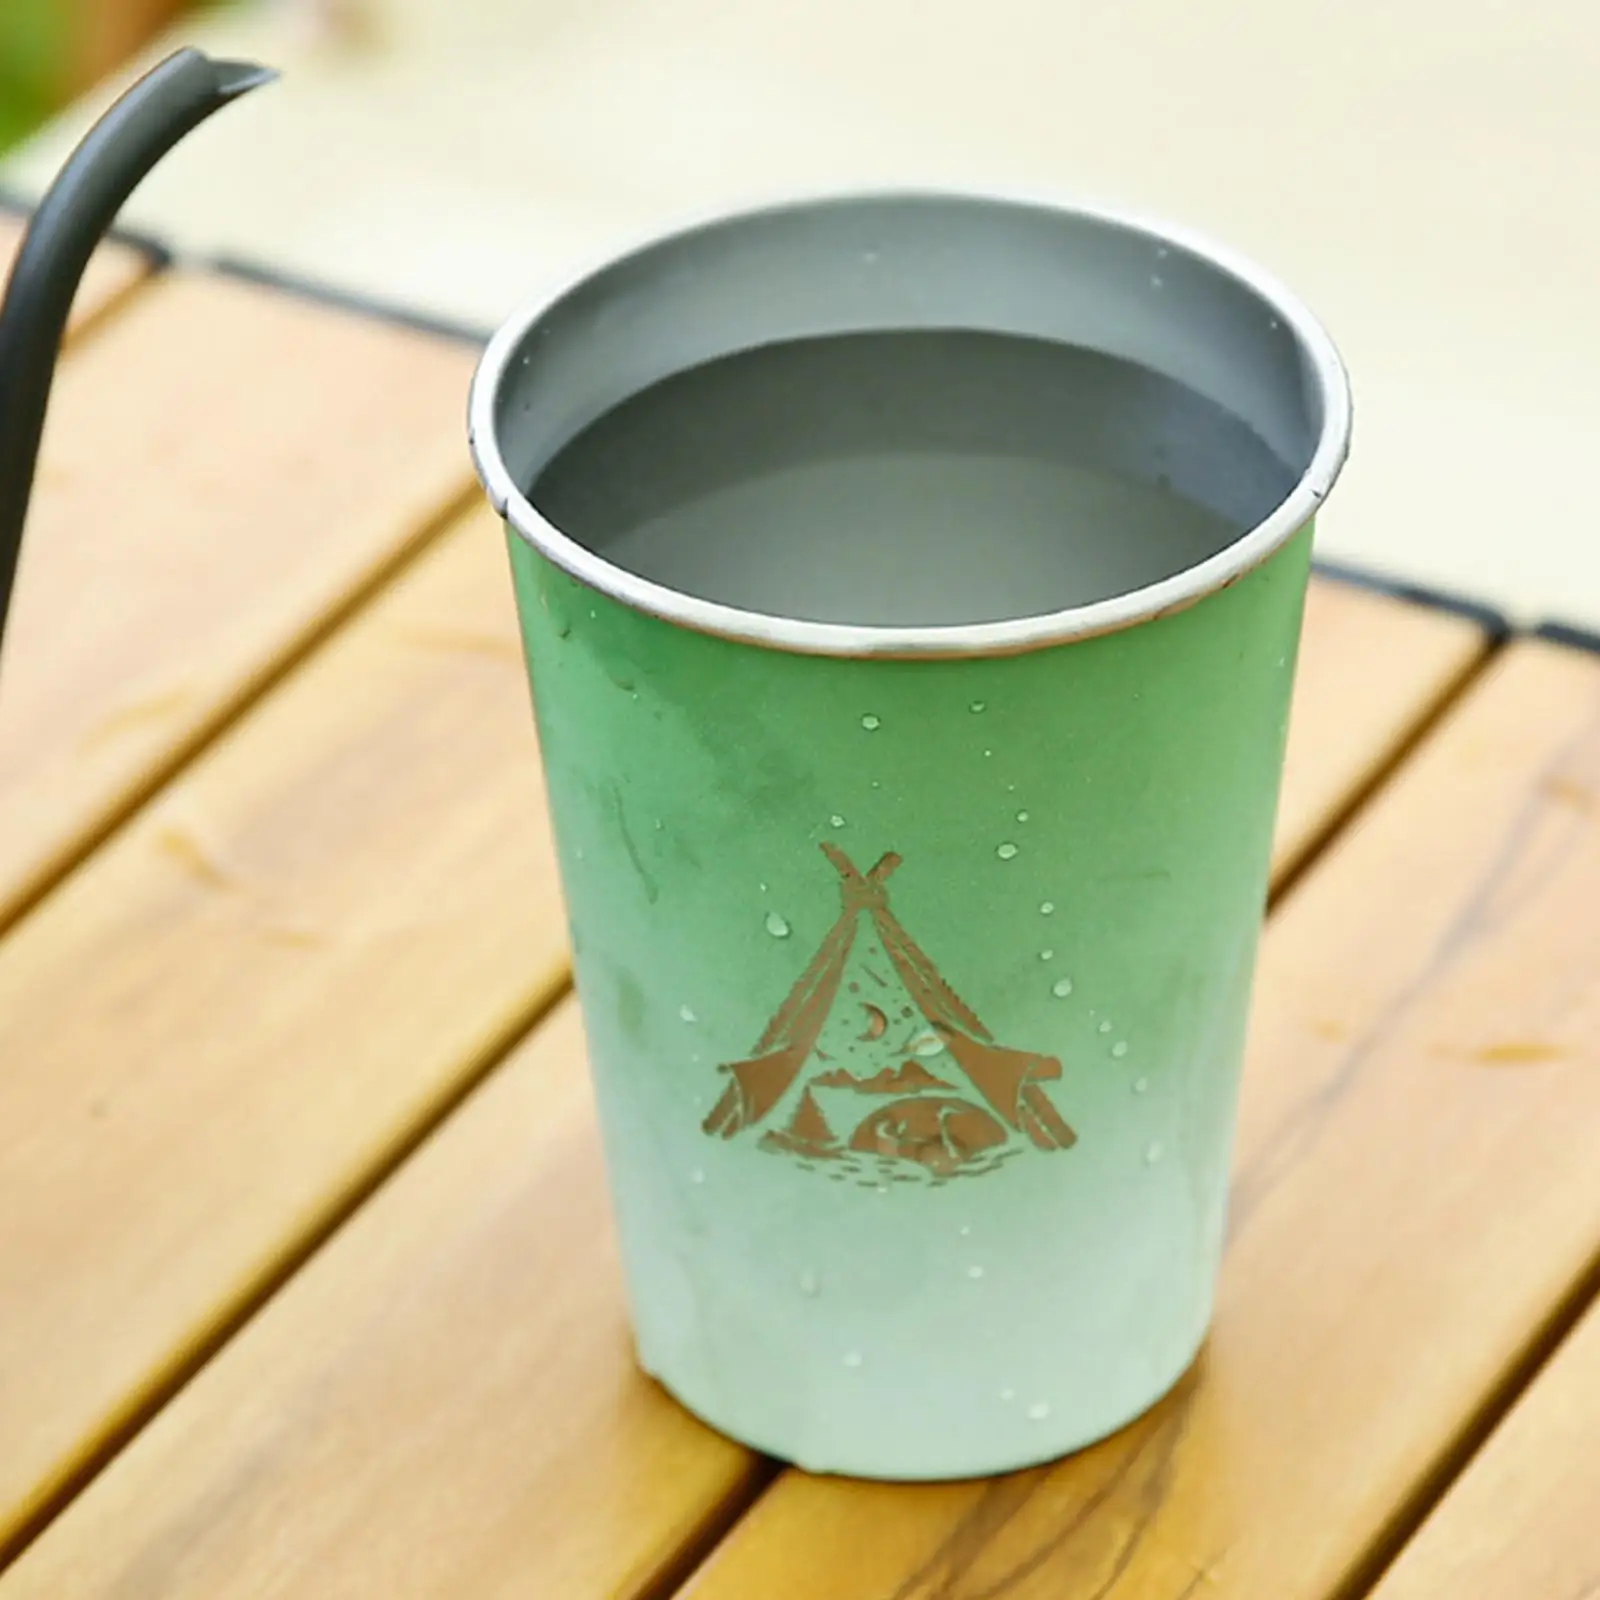 4Pcs Stainless Steel Cup Camping Tableware Coffee Mugs with Carrying Bag 350ml